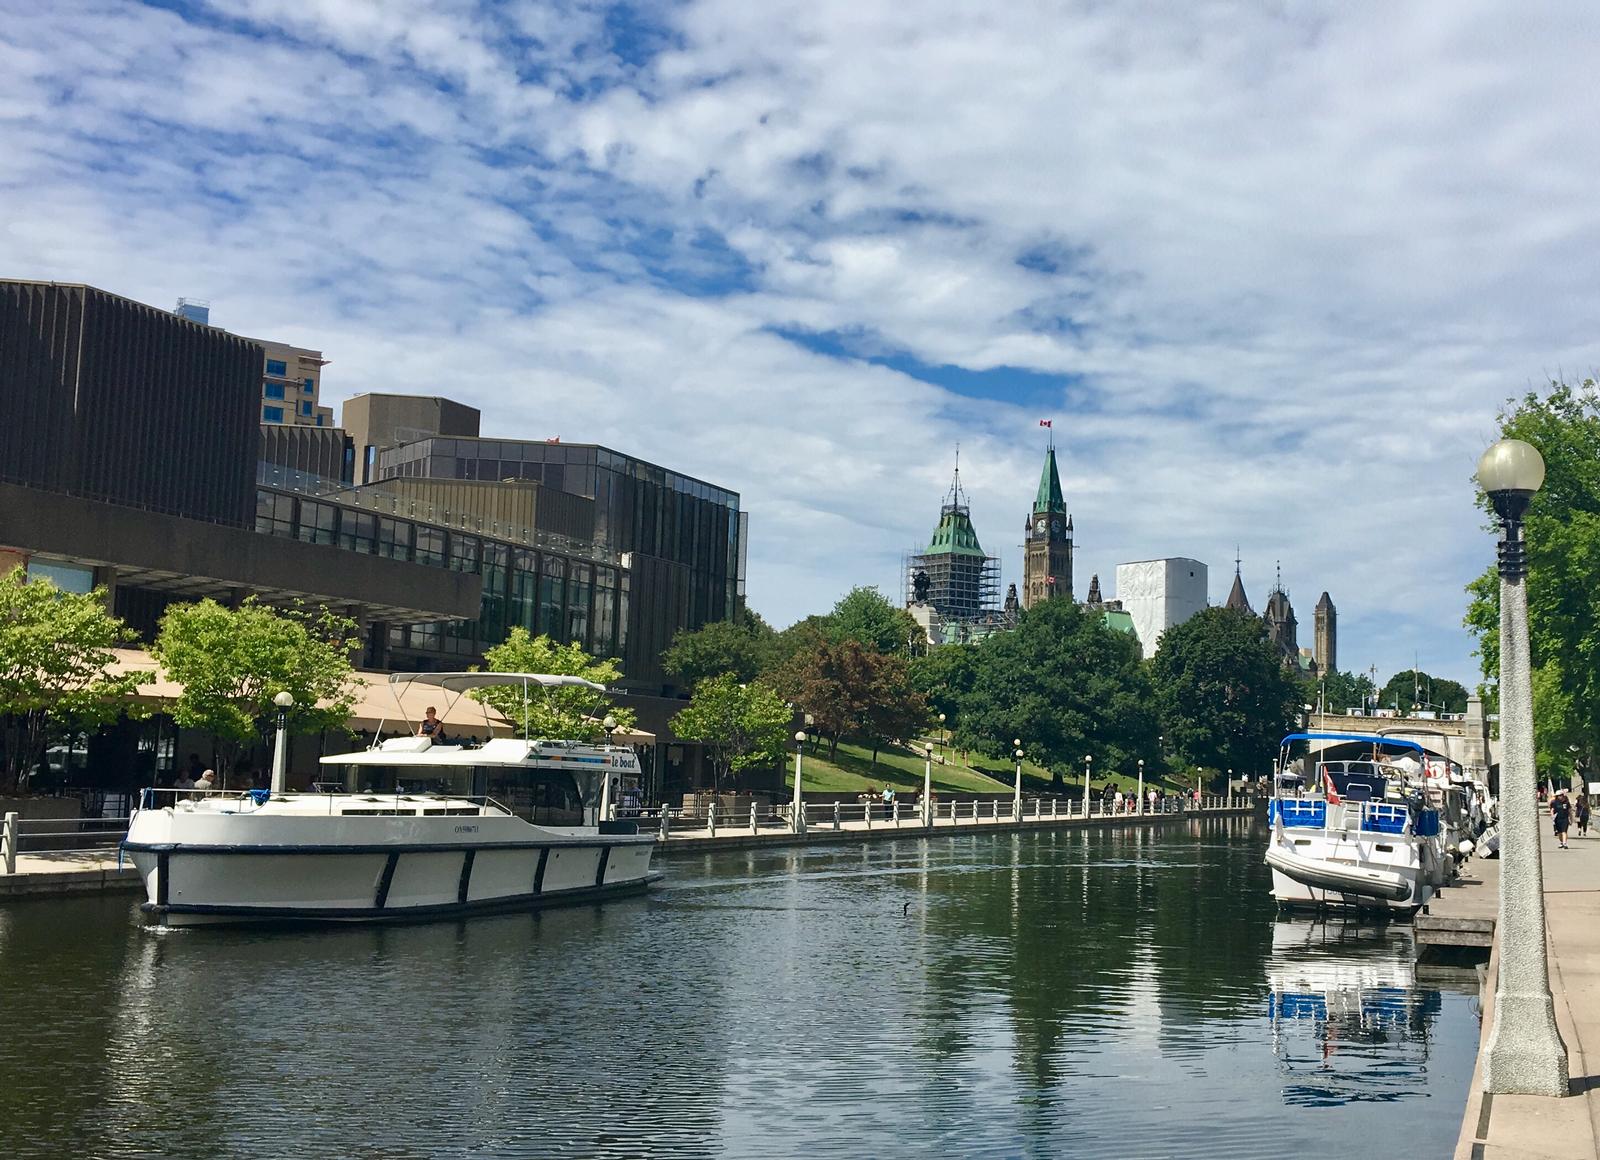 Amazing Places To Visit On The Rideau Canal – Ottawa To Kingston